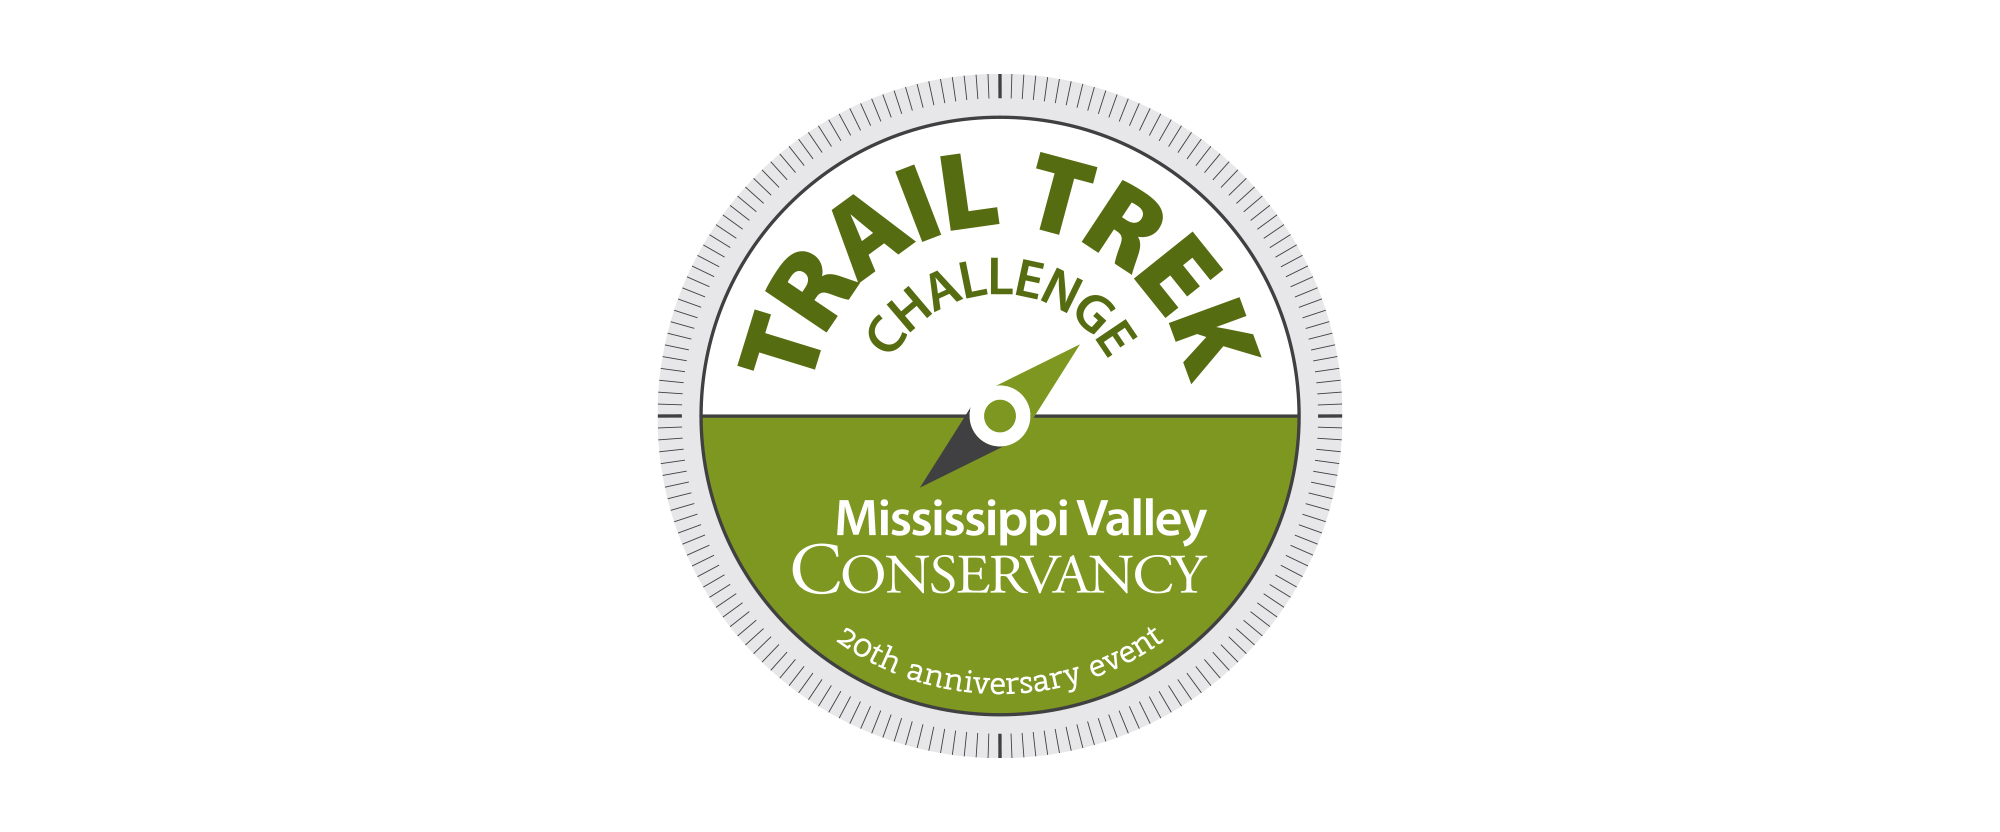 Circular Mississippi Valley Conservancy Trail Trek Challenge 20-year anniversary color logo created by Vendi 